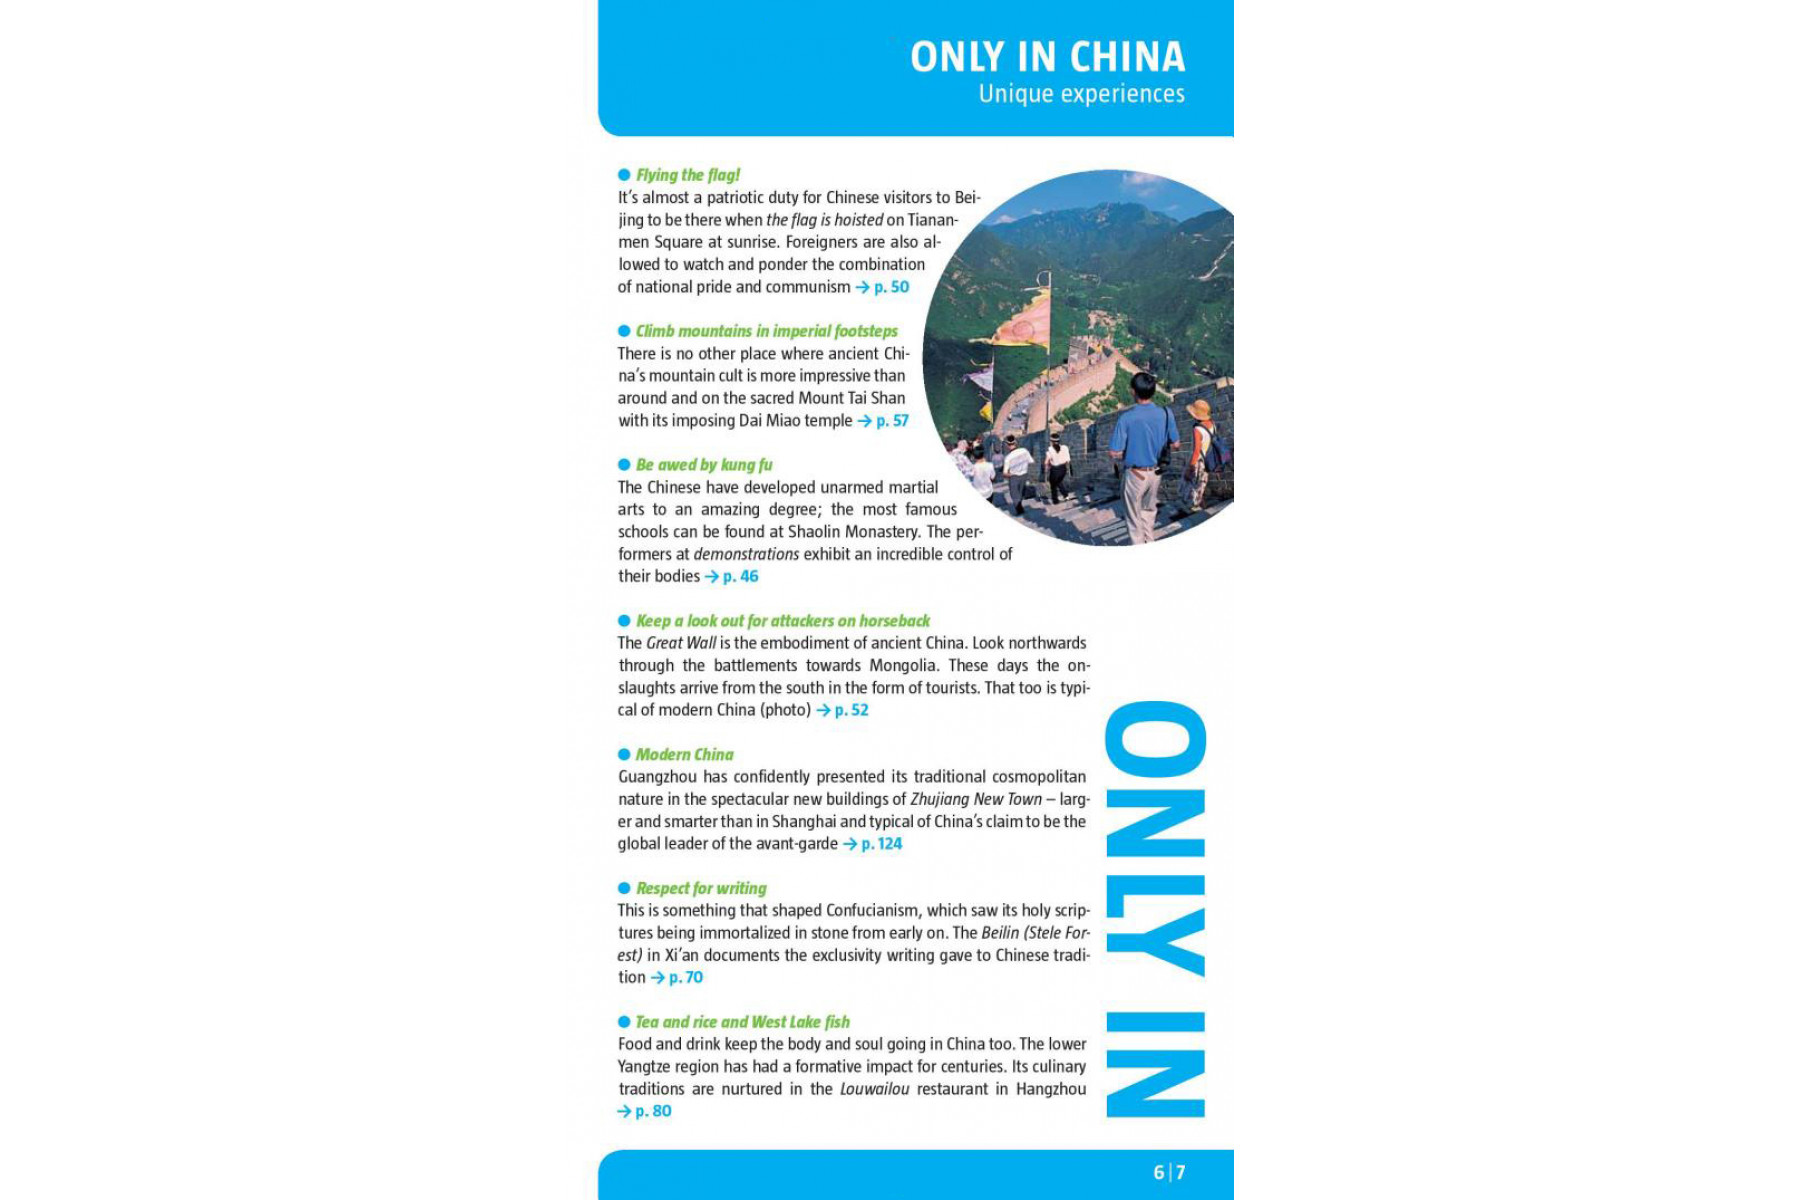 China Marco Polo Guide